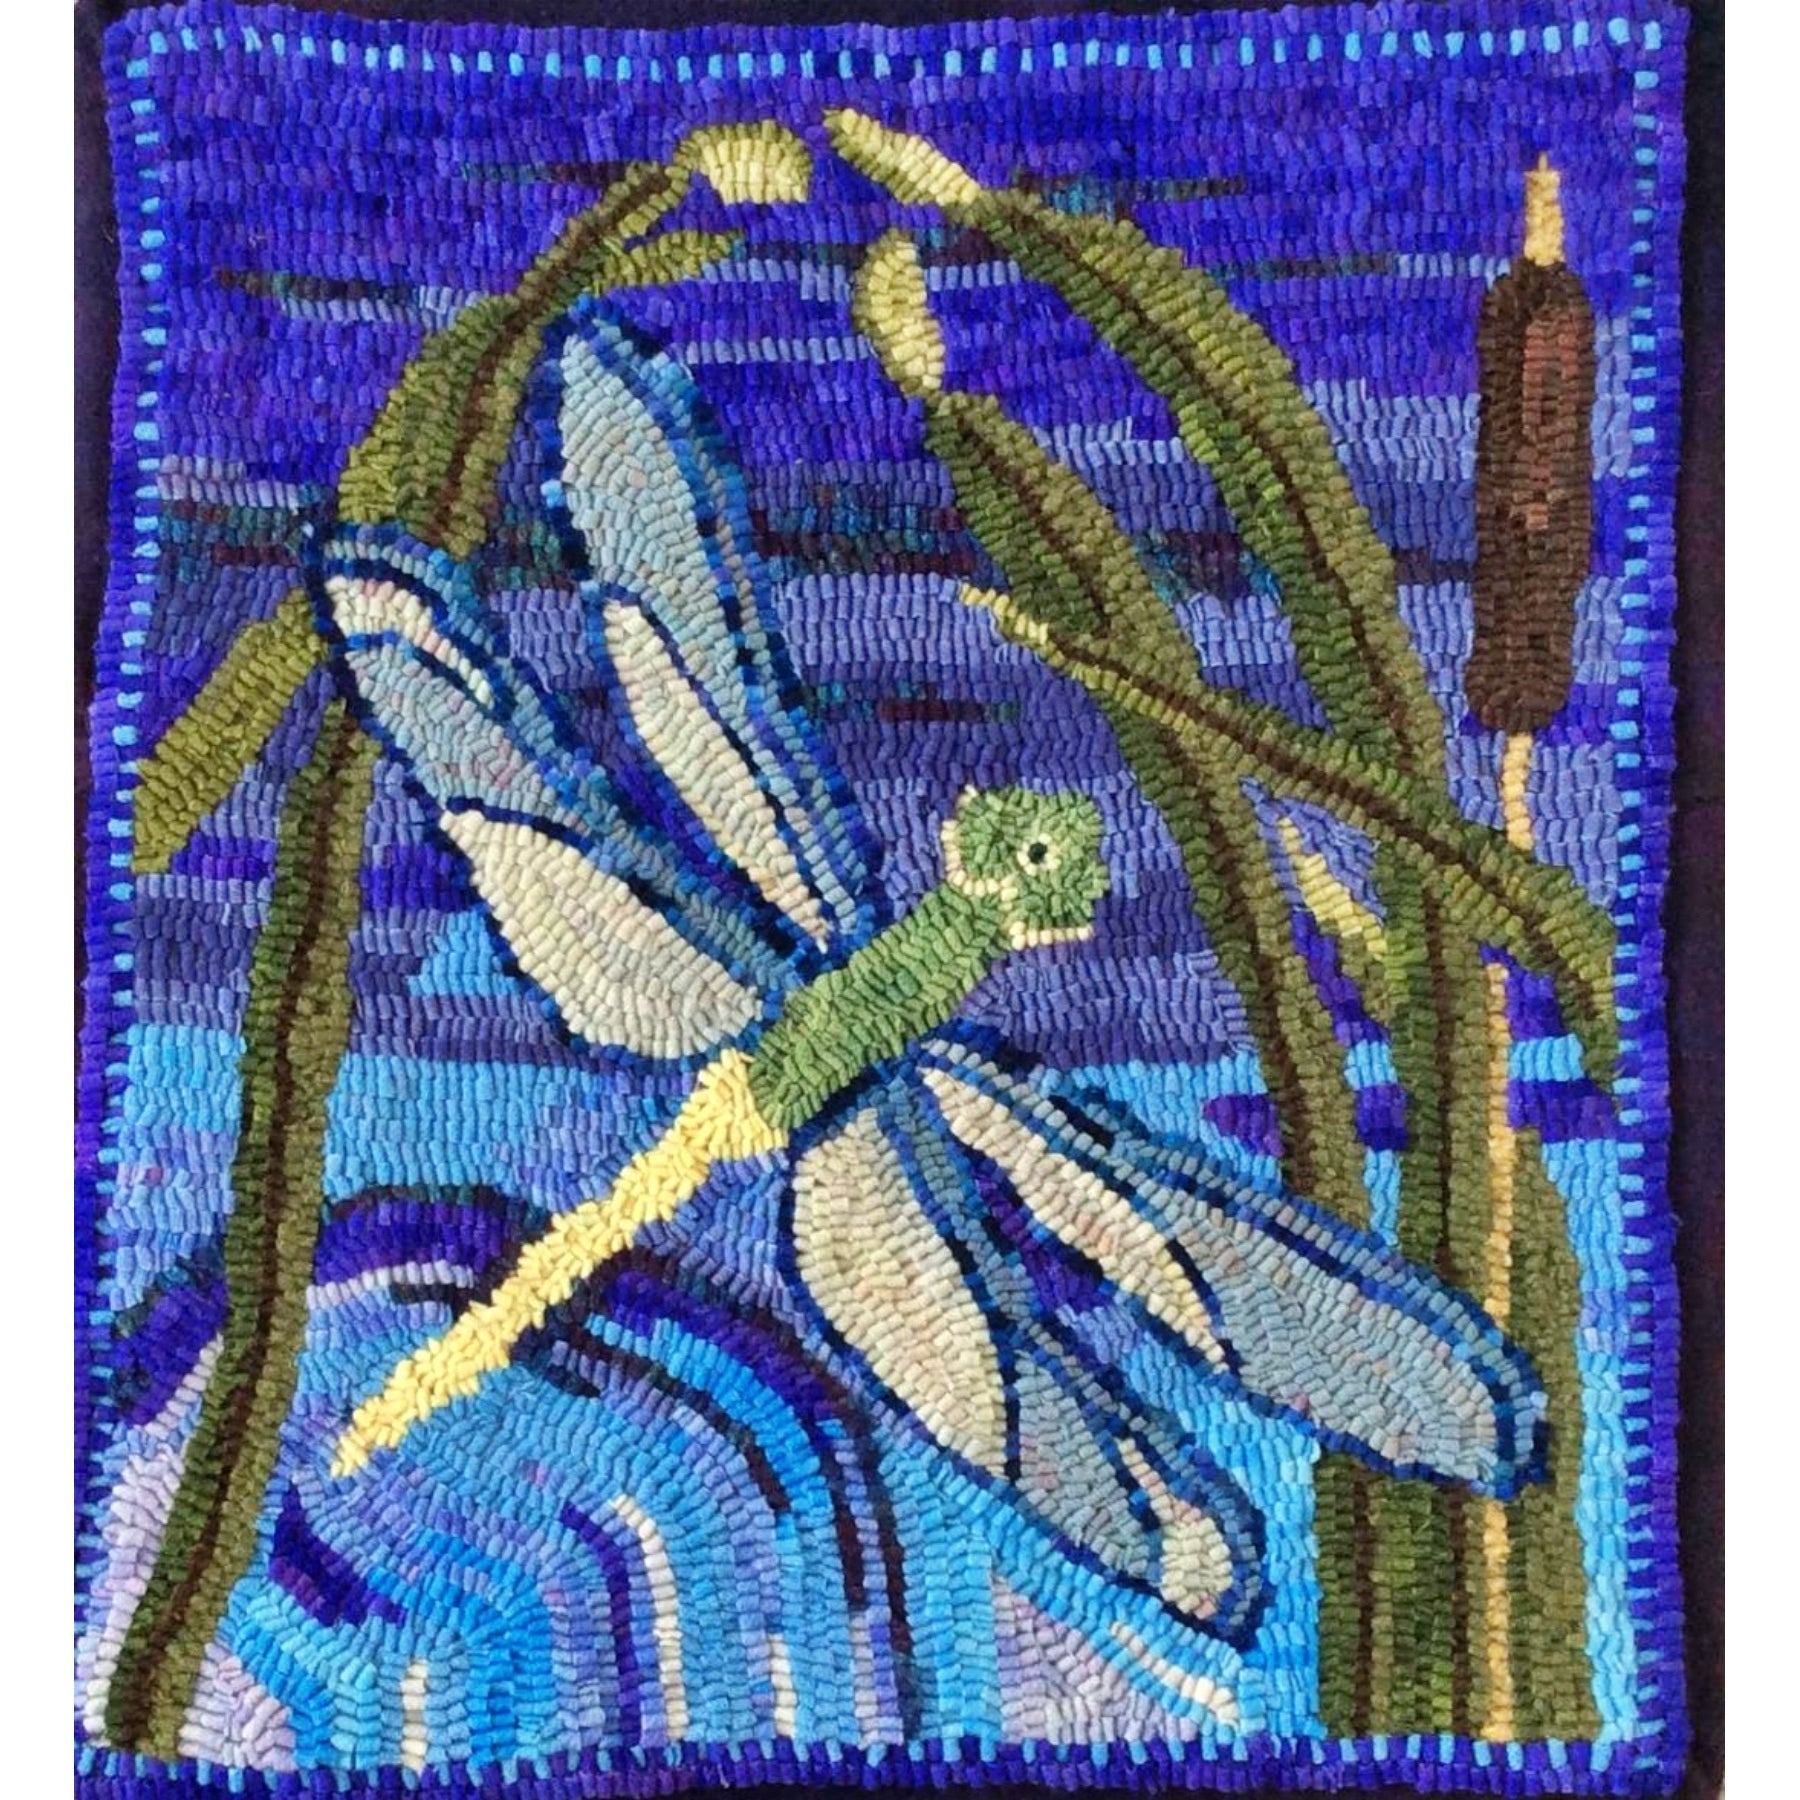 Dragonflies, rug hooked by Amy Natiello